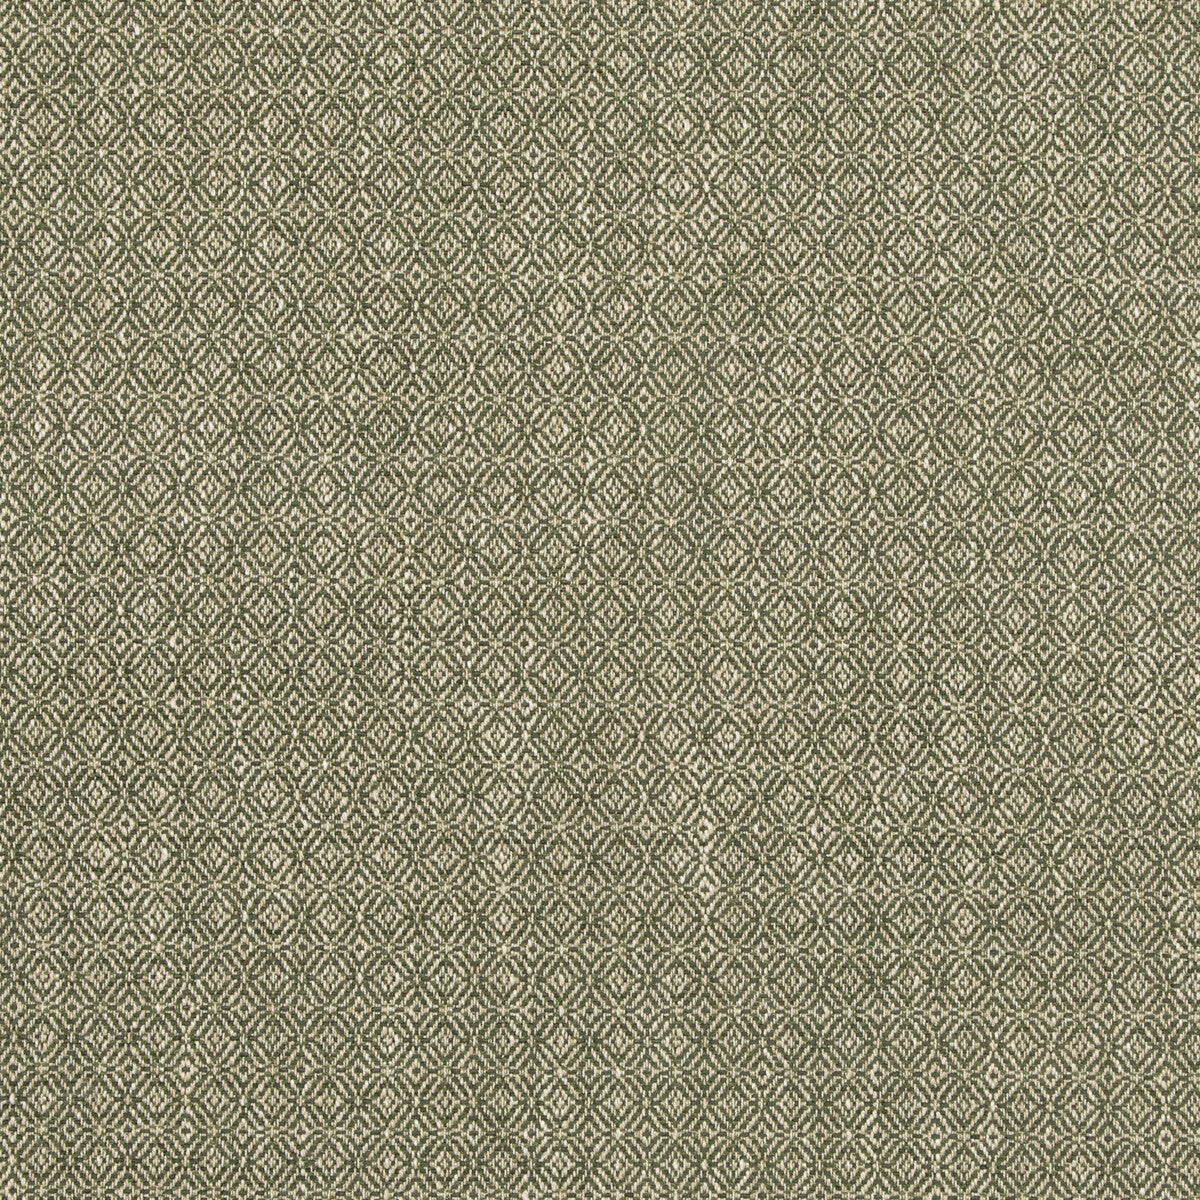 Kenton fabric in green color - pattern BF10868.735.0 - by G P &amp; J Baker in the Essential Colours II collection